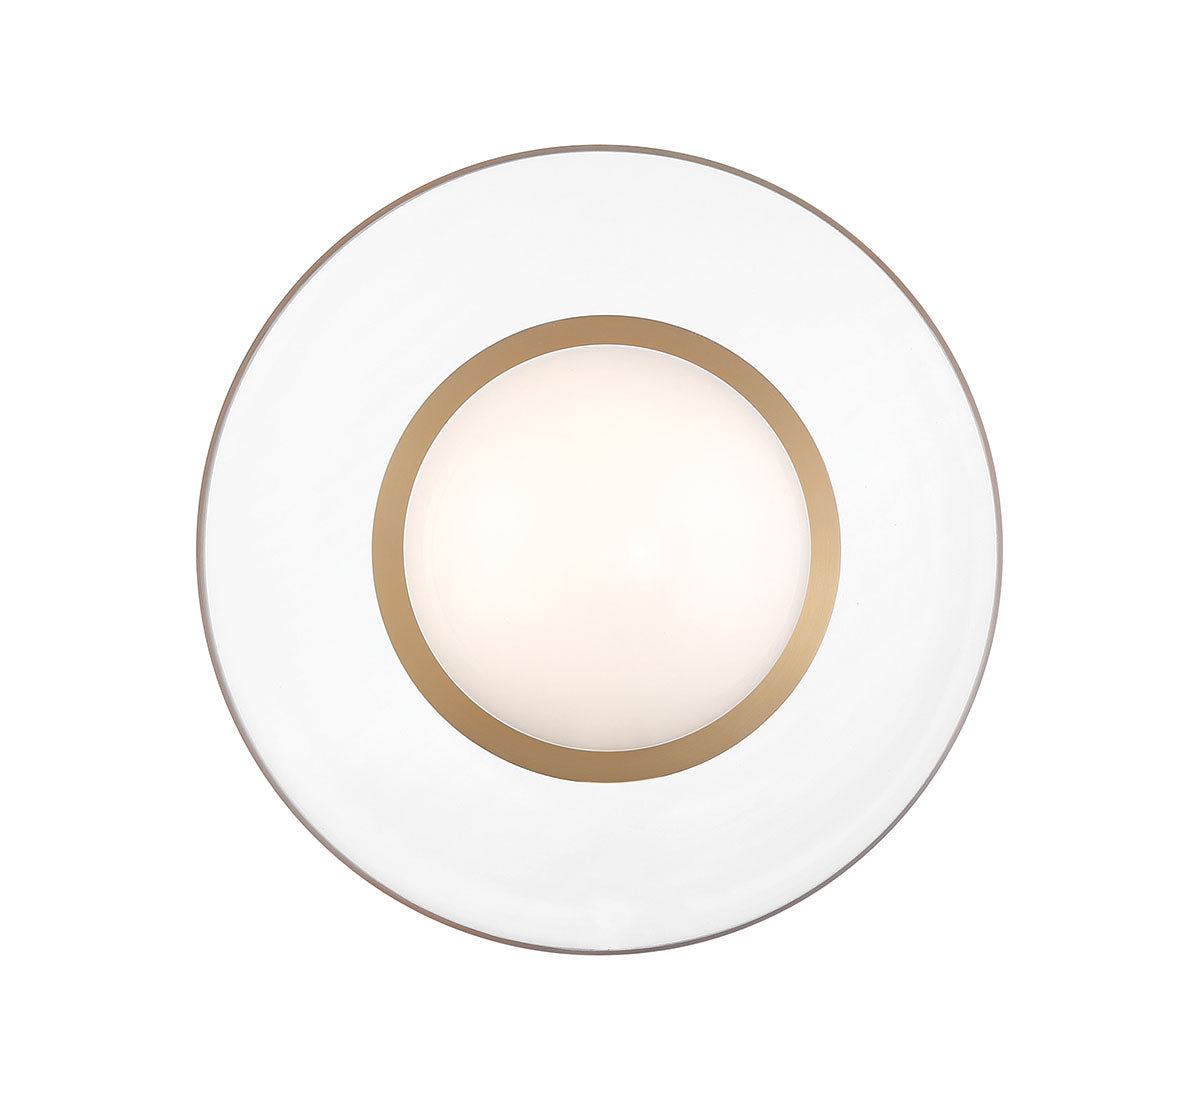 ANCONA 10125-05, Small 1 Light Ceiling / Wall Mount